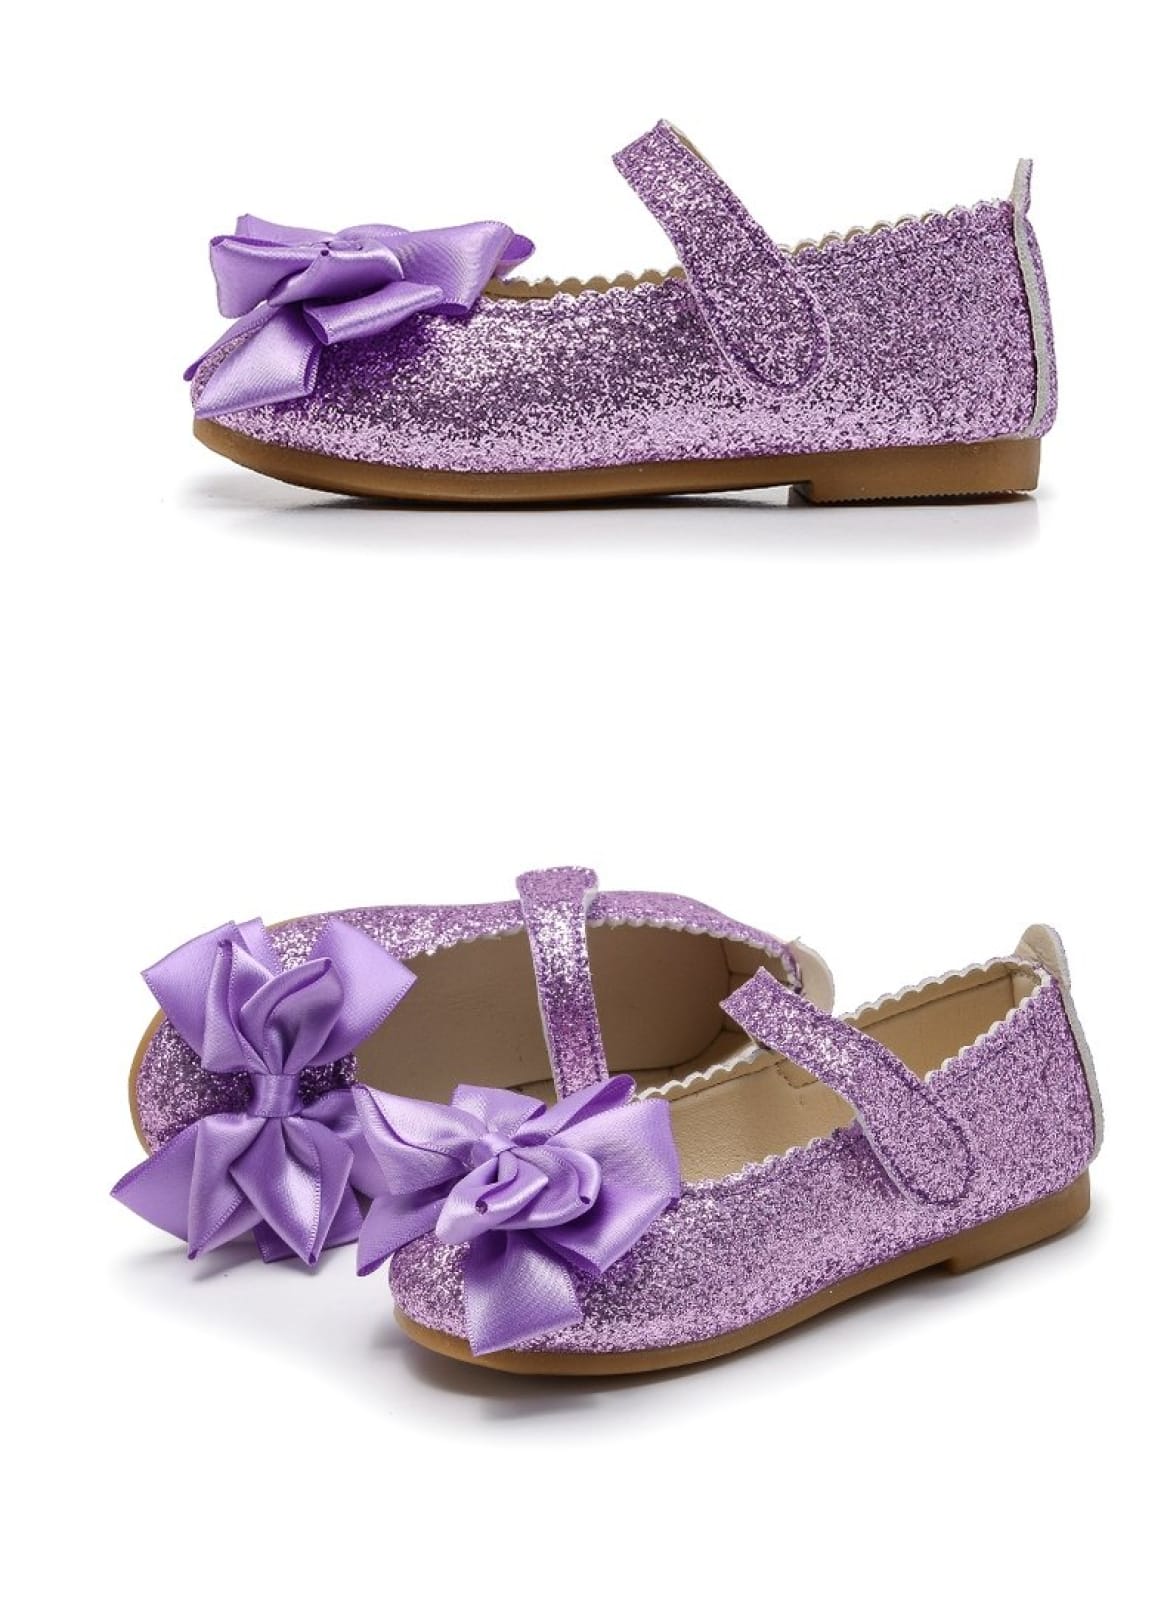 Purple / Pink / Gold Bowknot Sequin Wedding Flower Girl Shoes Kids Baby Princess Shoes